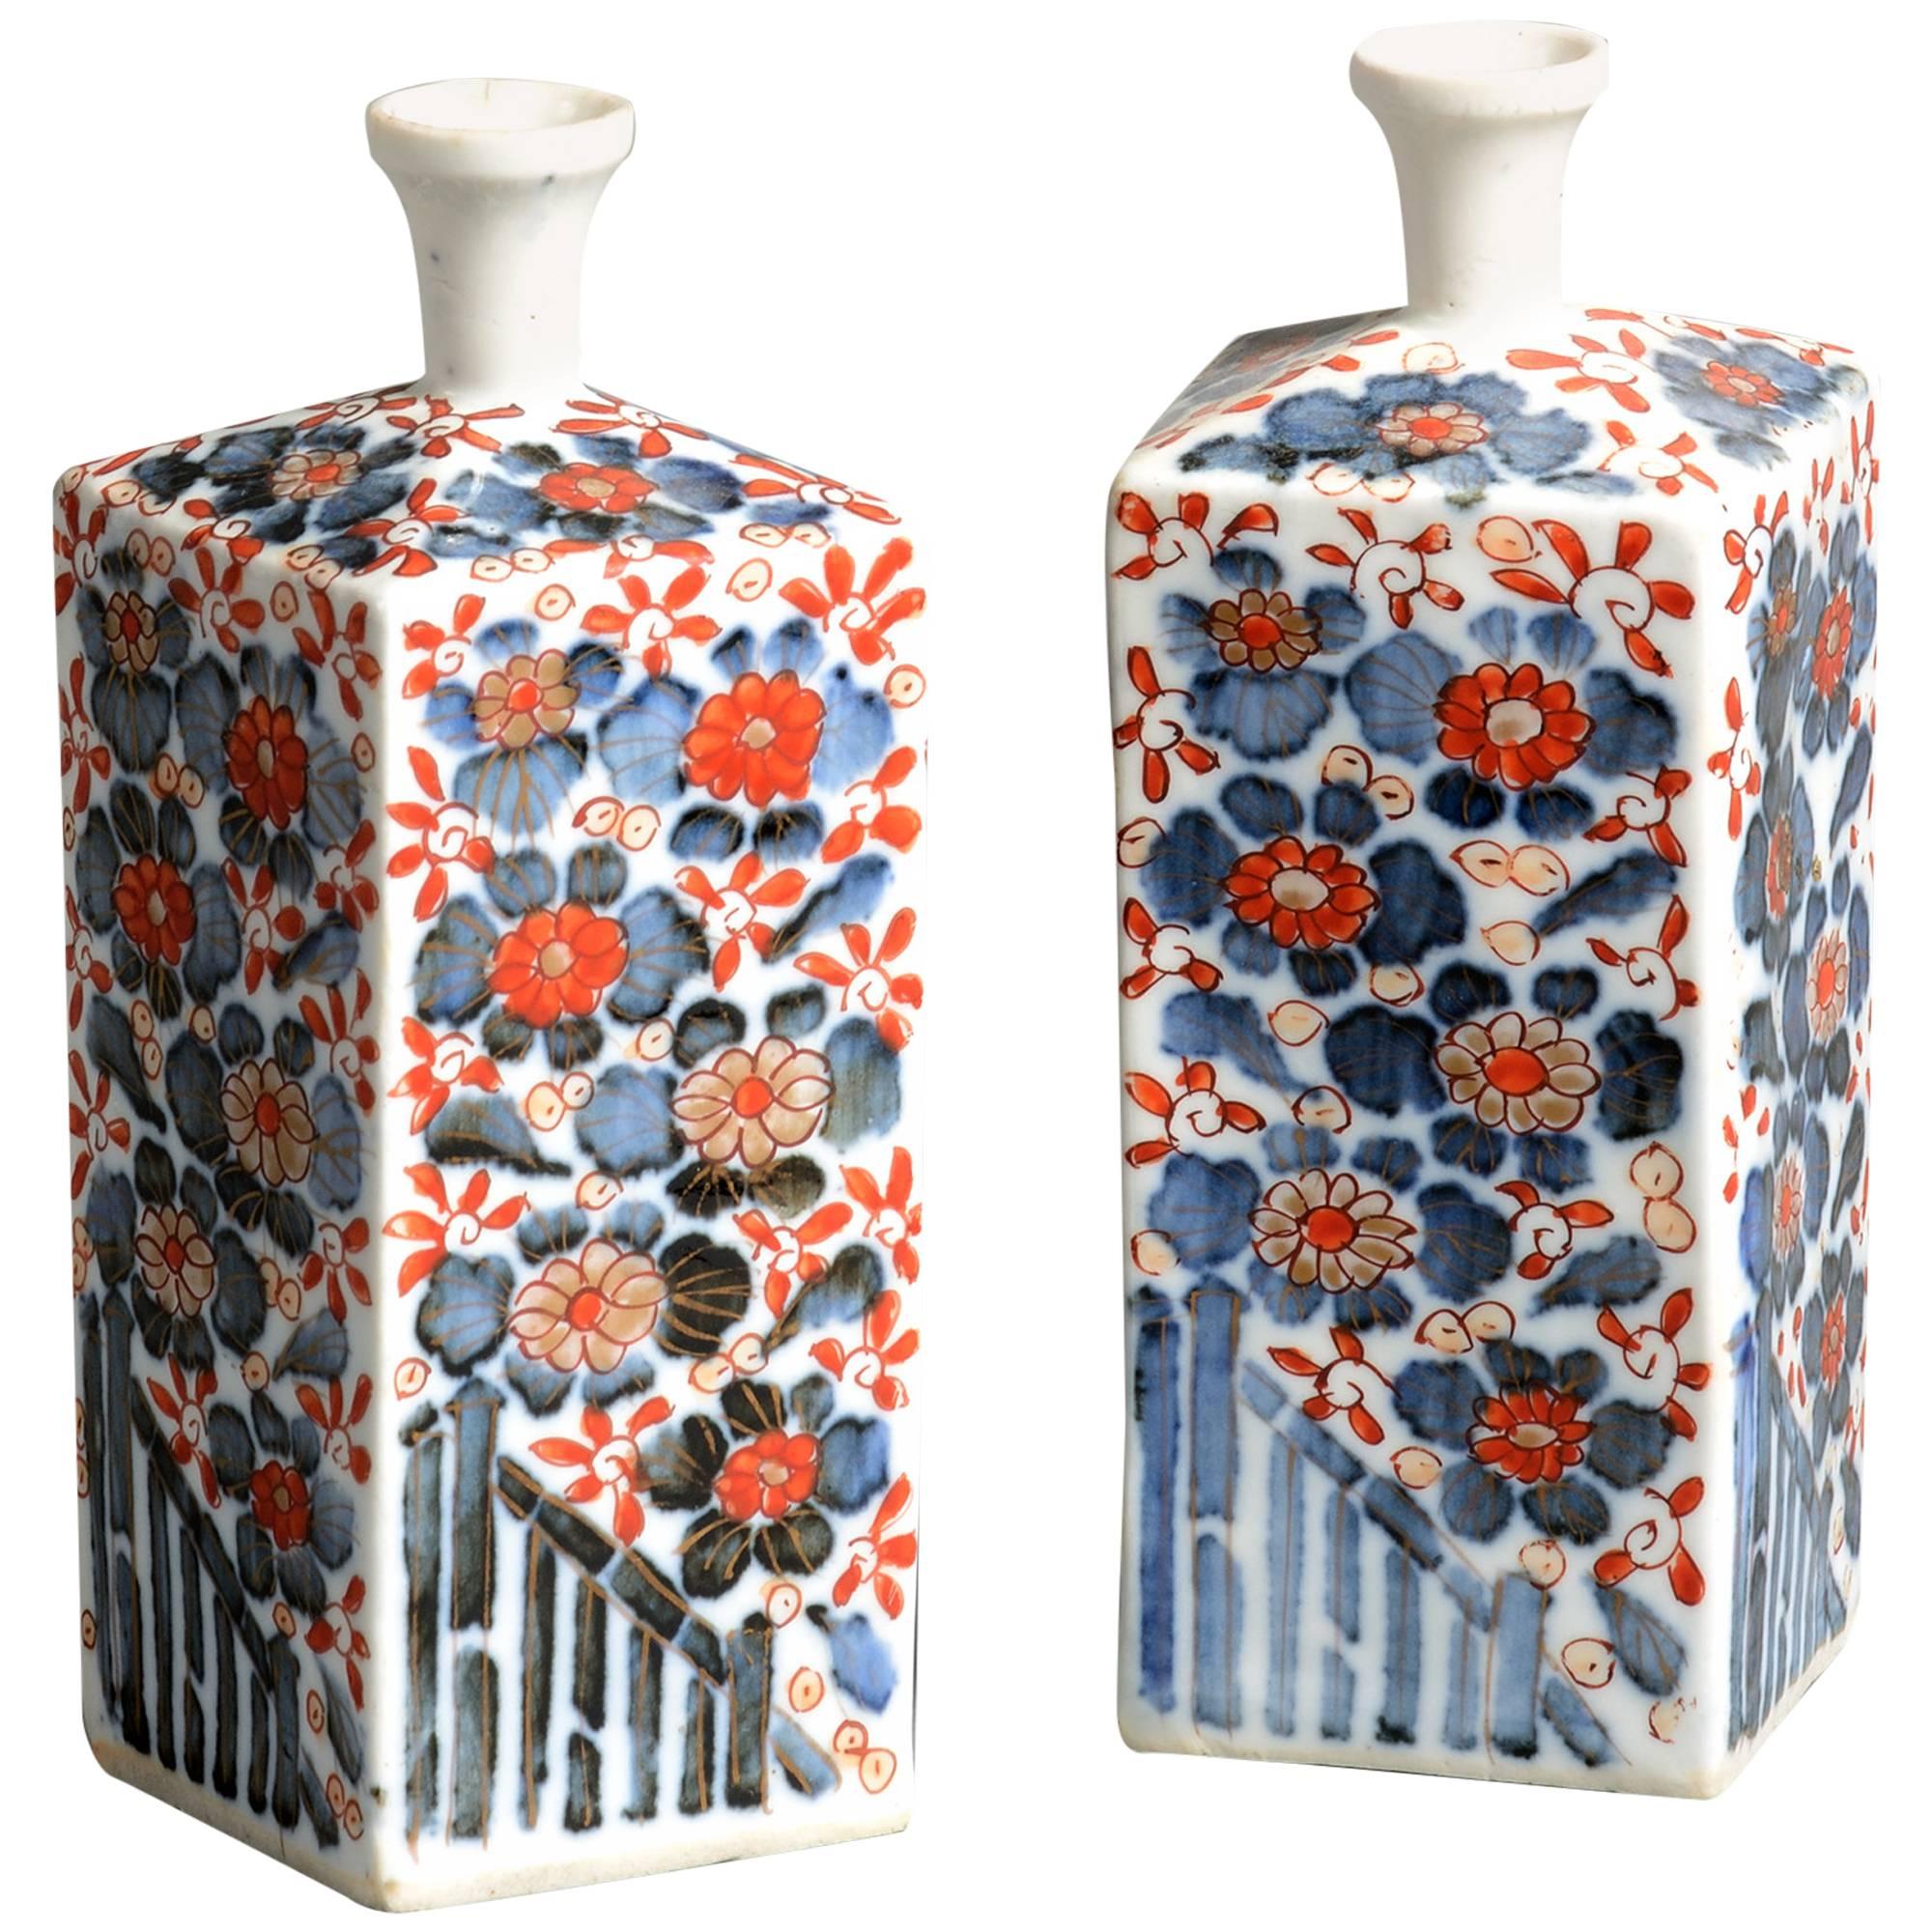 19th Century White Imari Porcelain Flasks / Vases Pair with Blue & Red Flowers